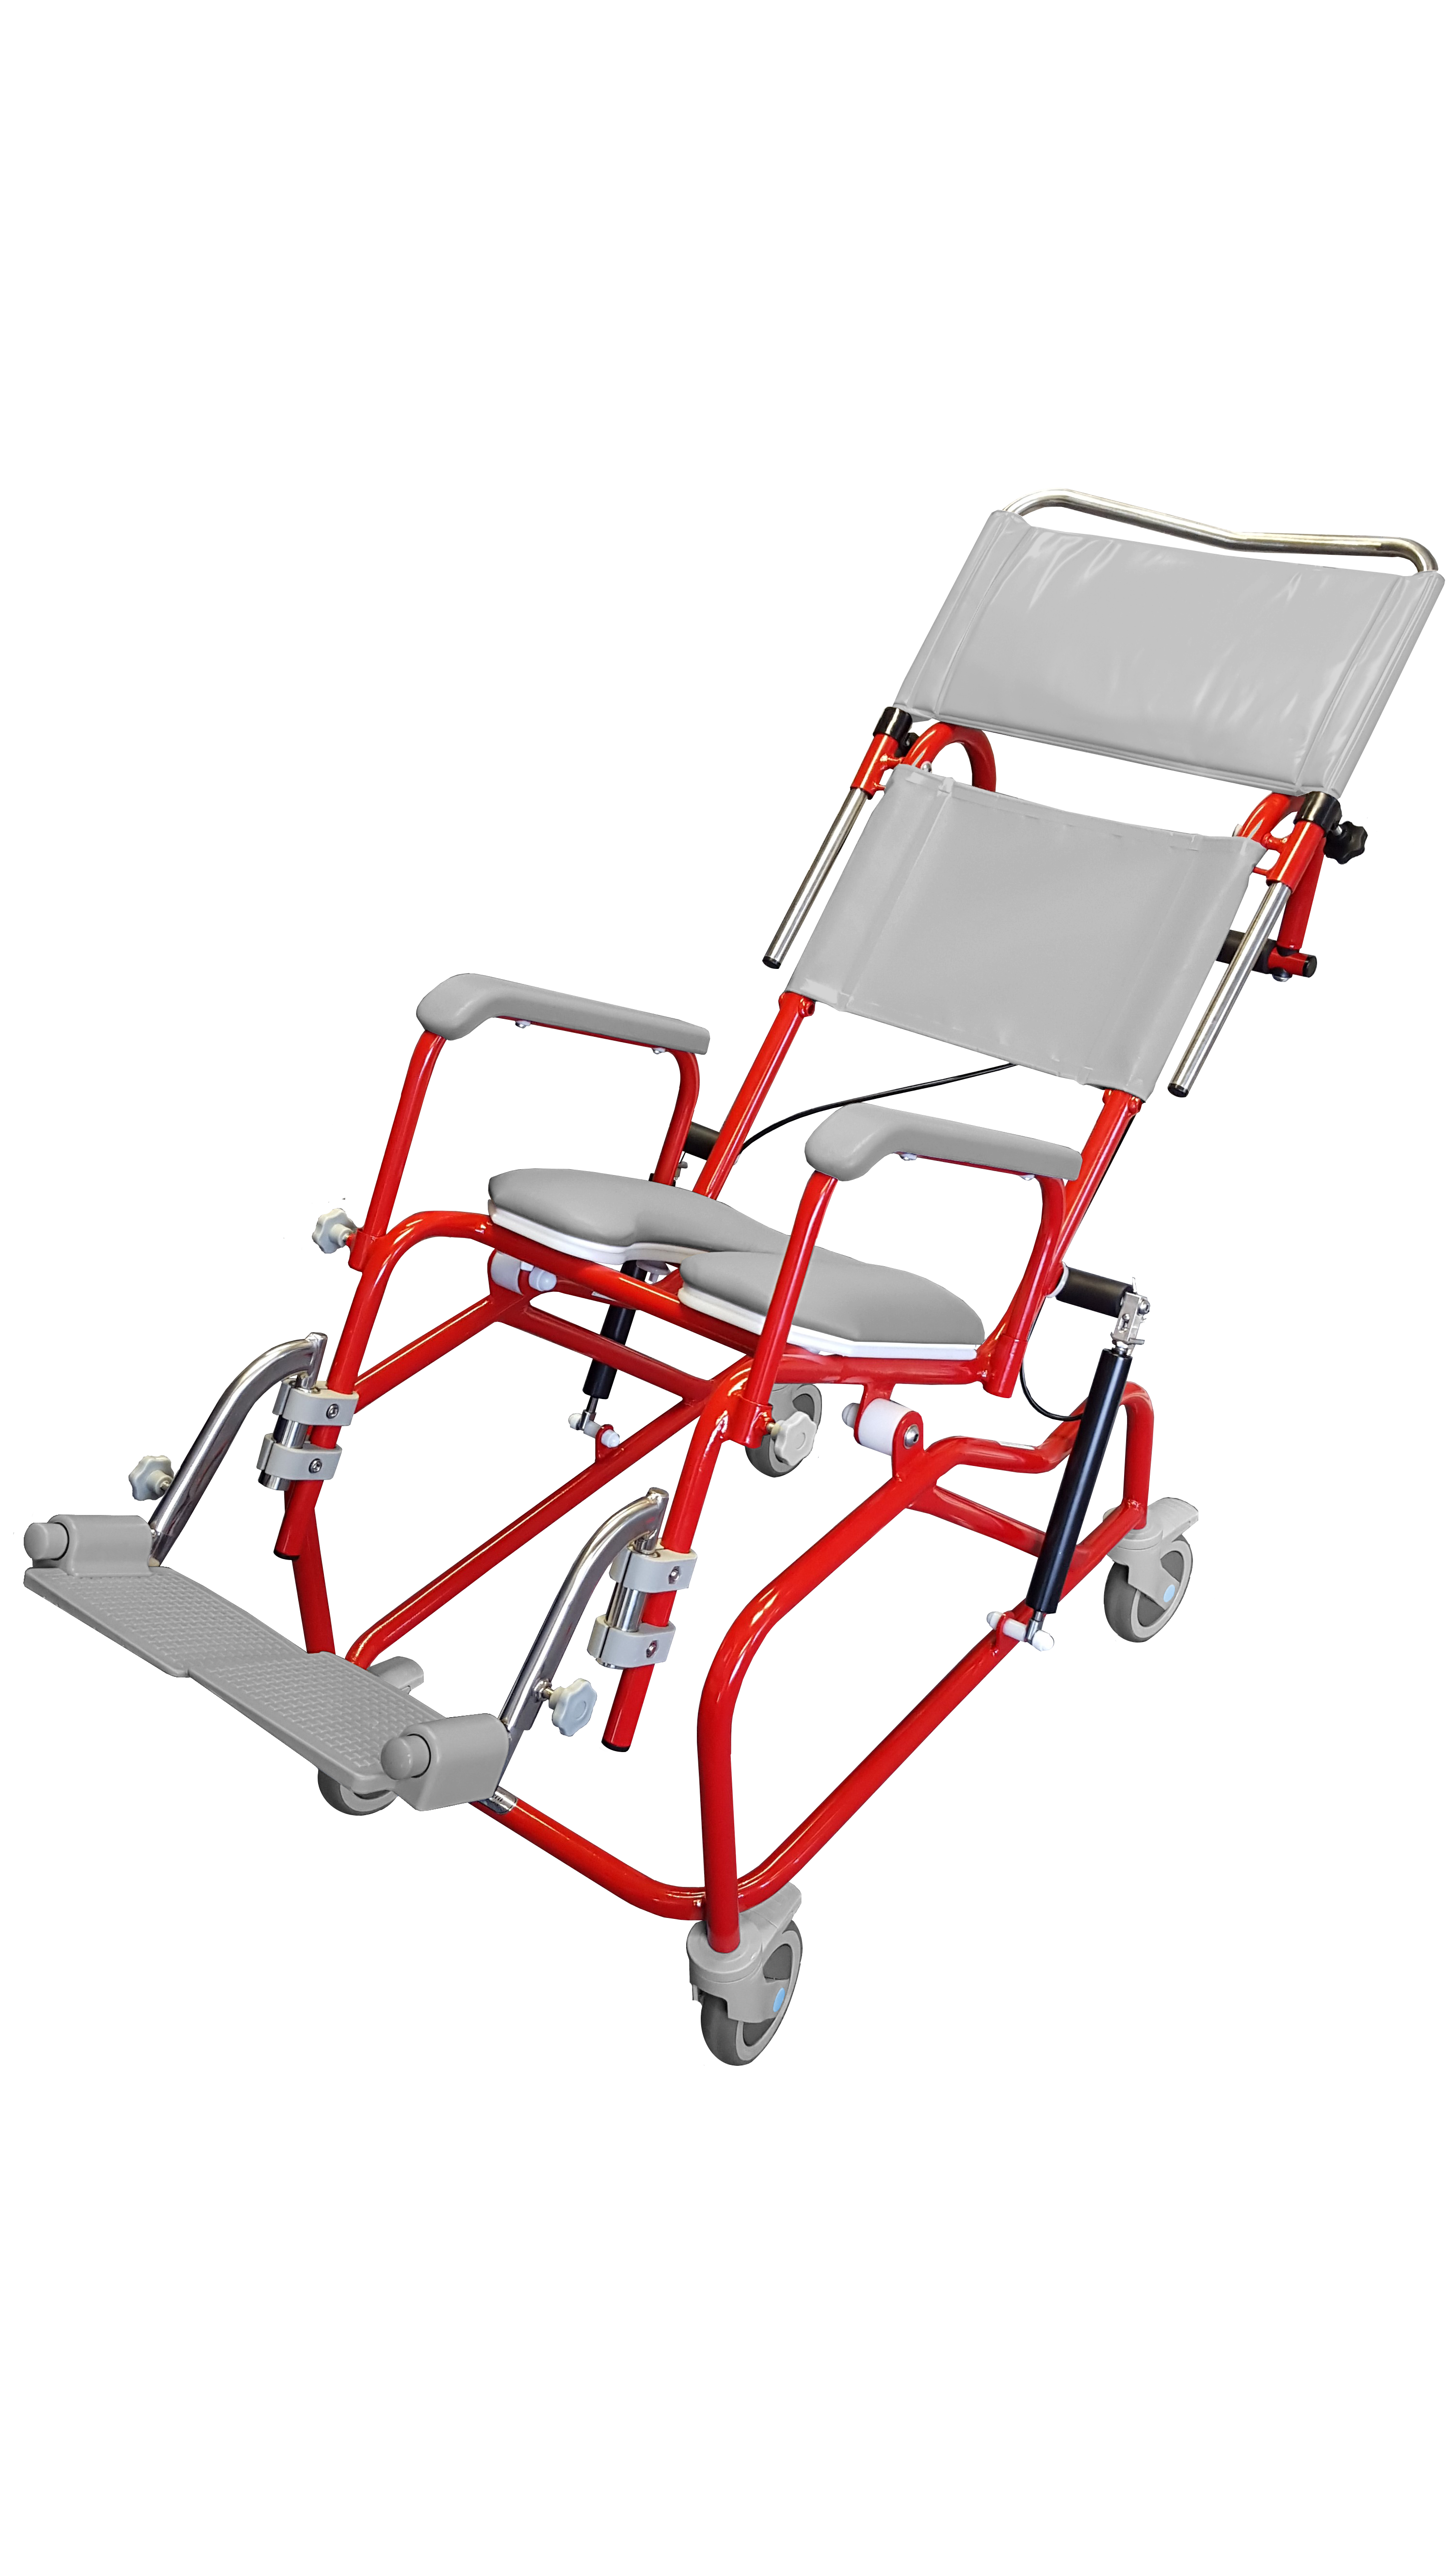 https://stairliftsscotland.com/wp-content/uploads/2022/05/Tilt-in-Space-Paediatric-Standard-model.png